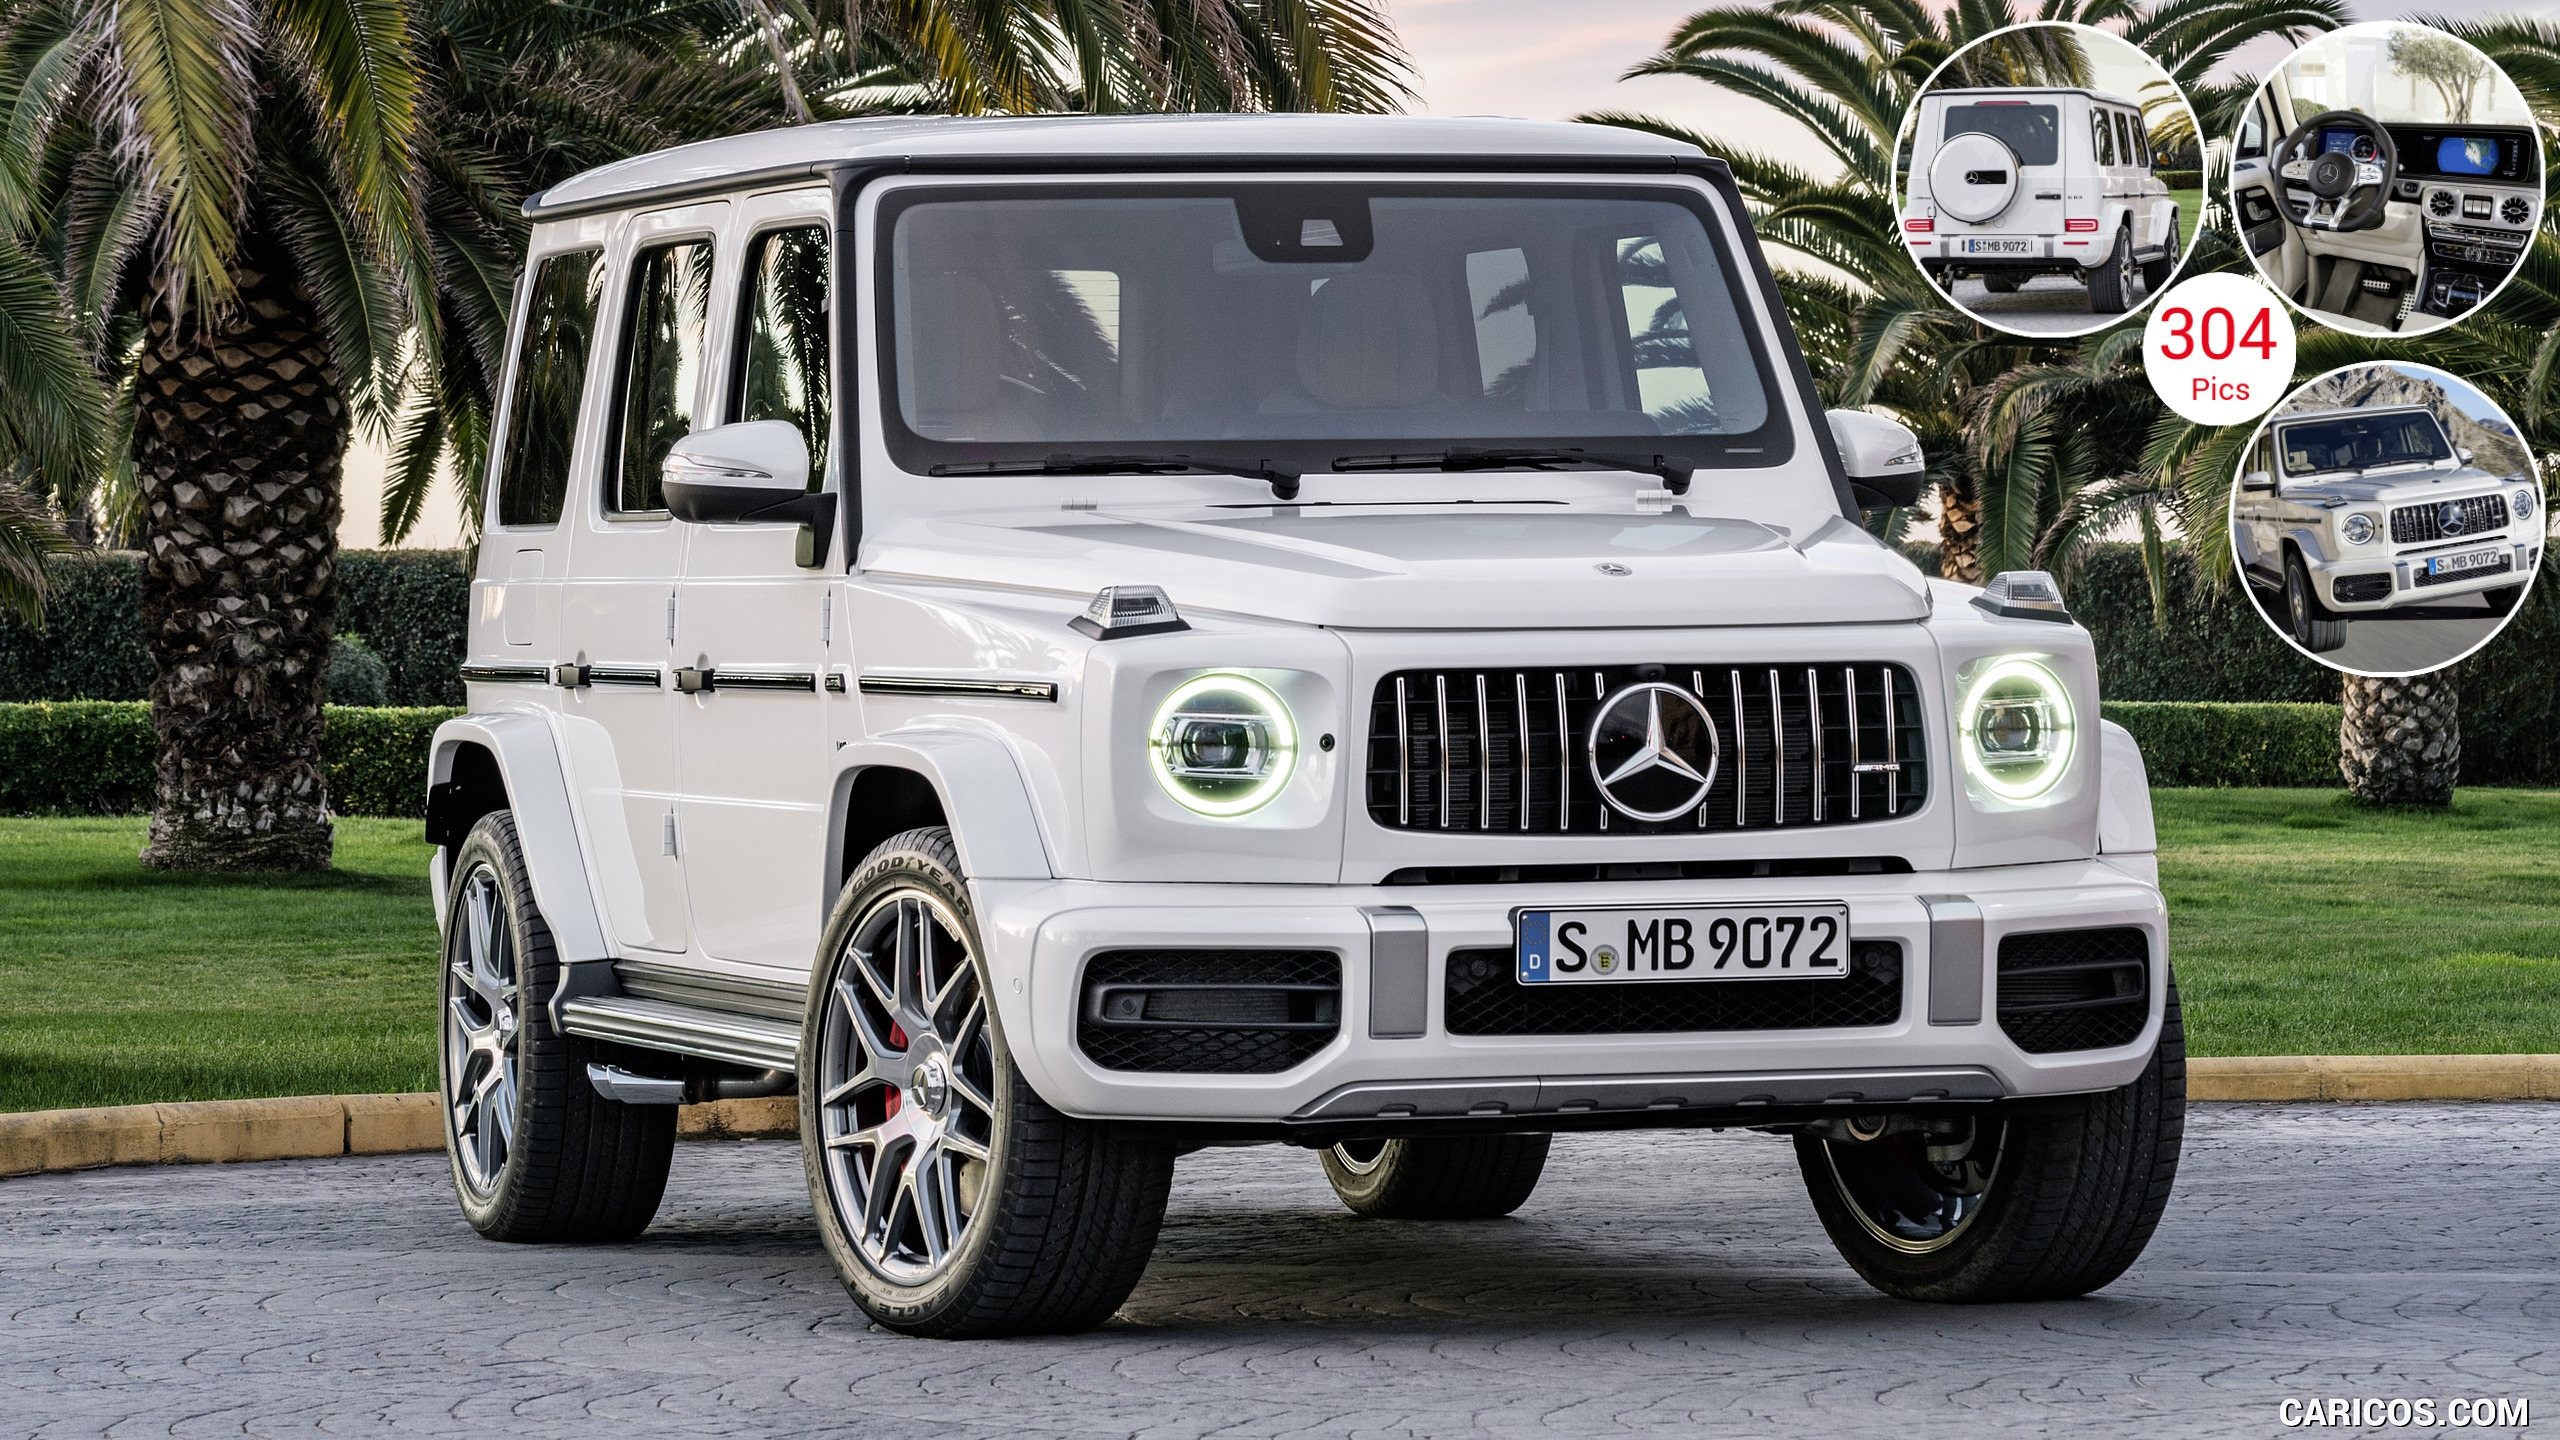 Mercedes G63 2019 White Amg Color Designo Mystic Bright - Mercedes G Class Price In India , HD Wallpaper & Backgrounds